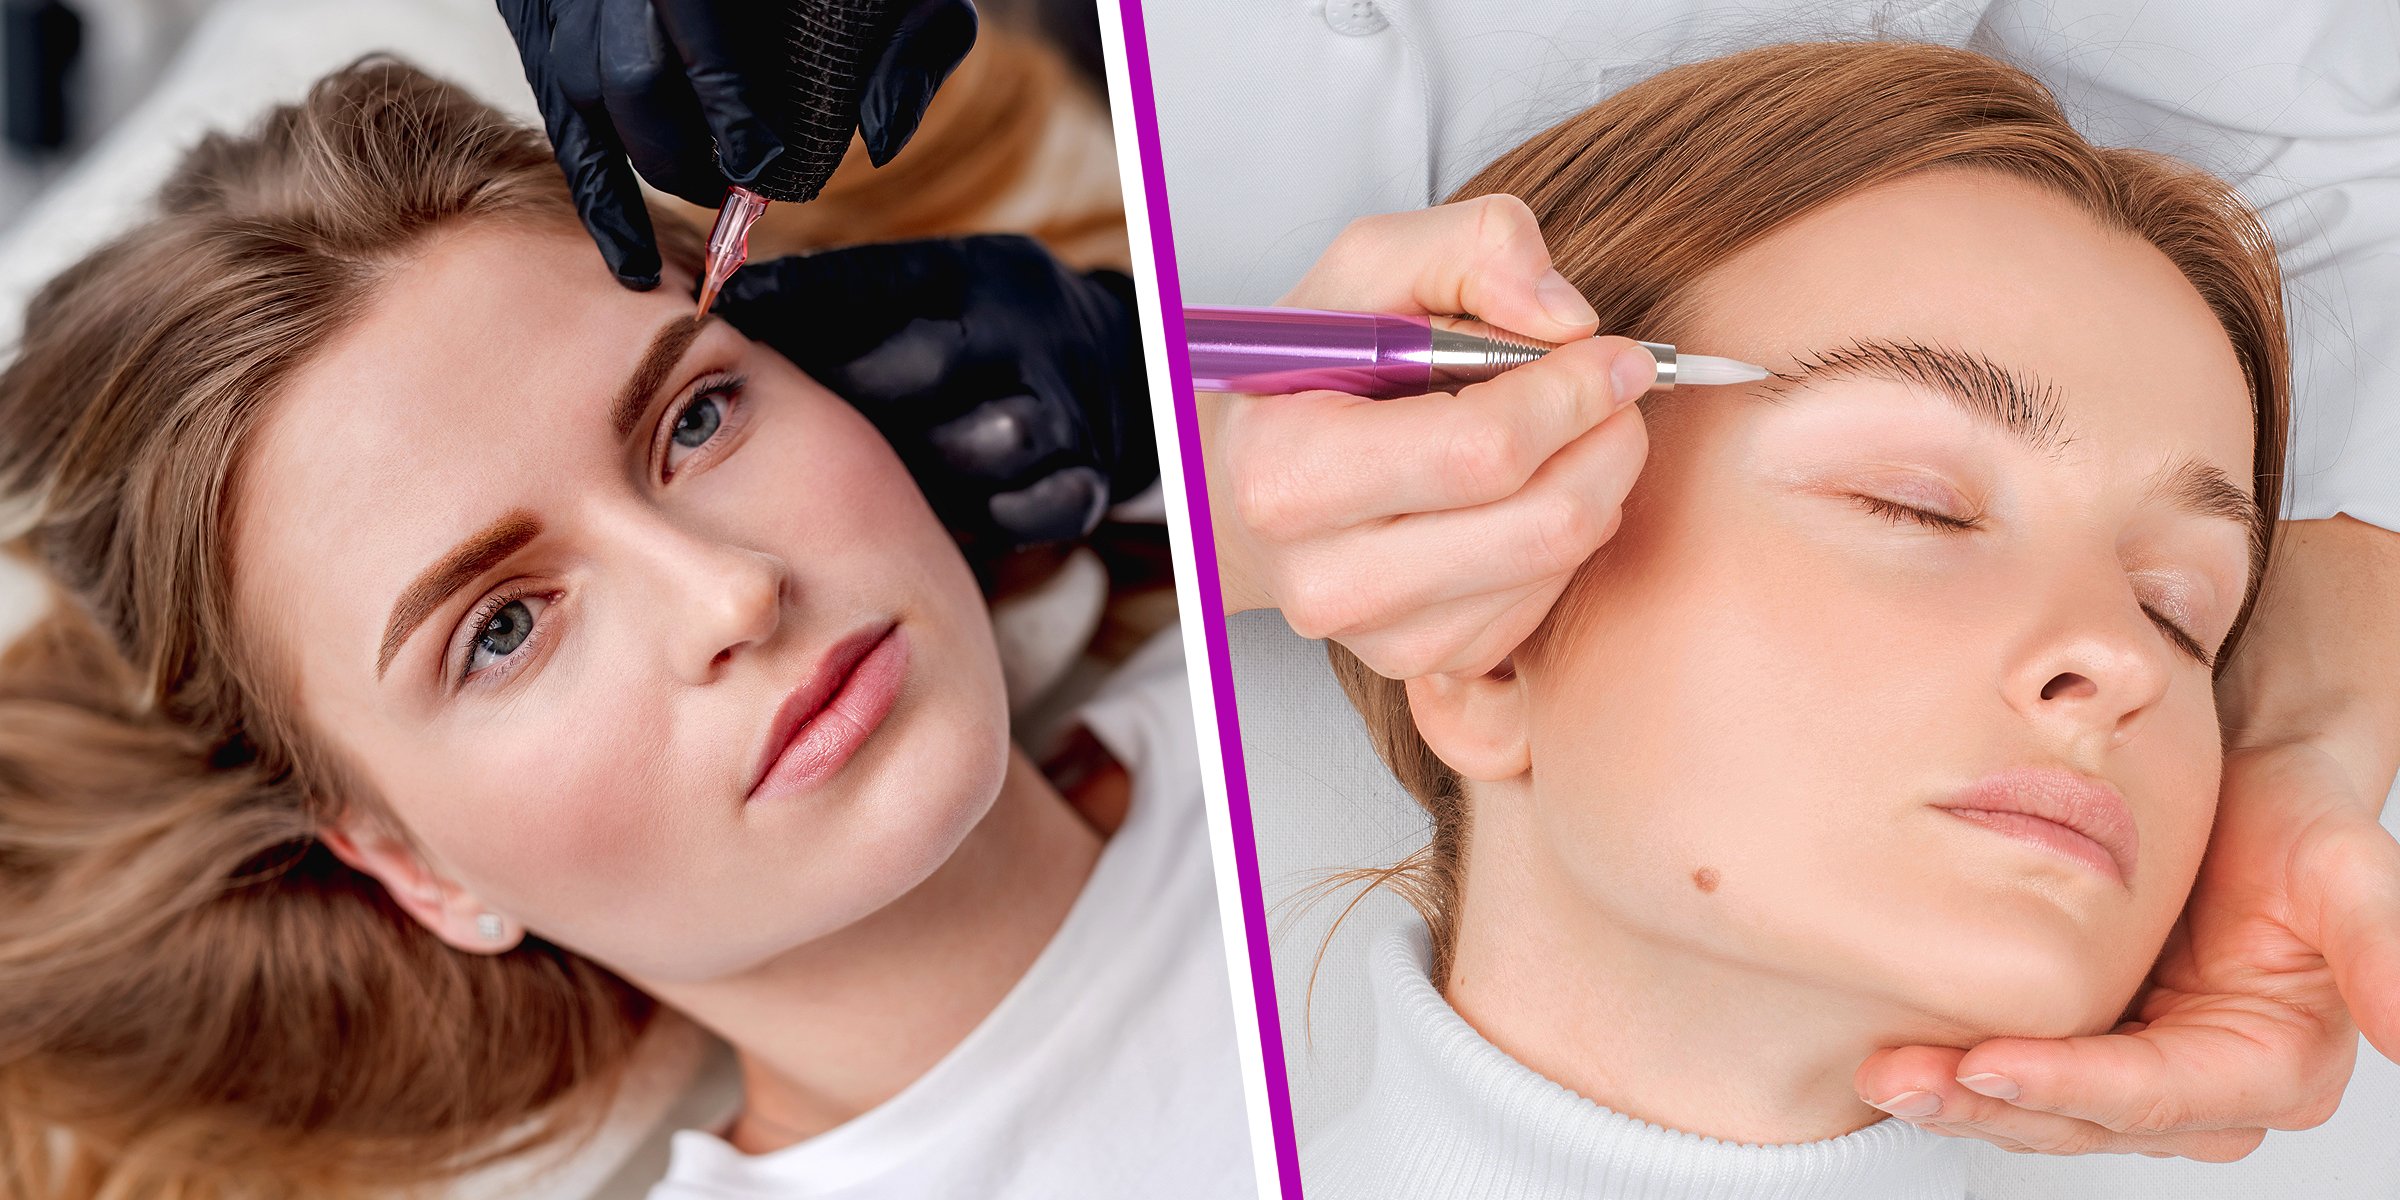 Woman getting ombré shading | Woman getting microblading | Source: Shutterstock